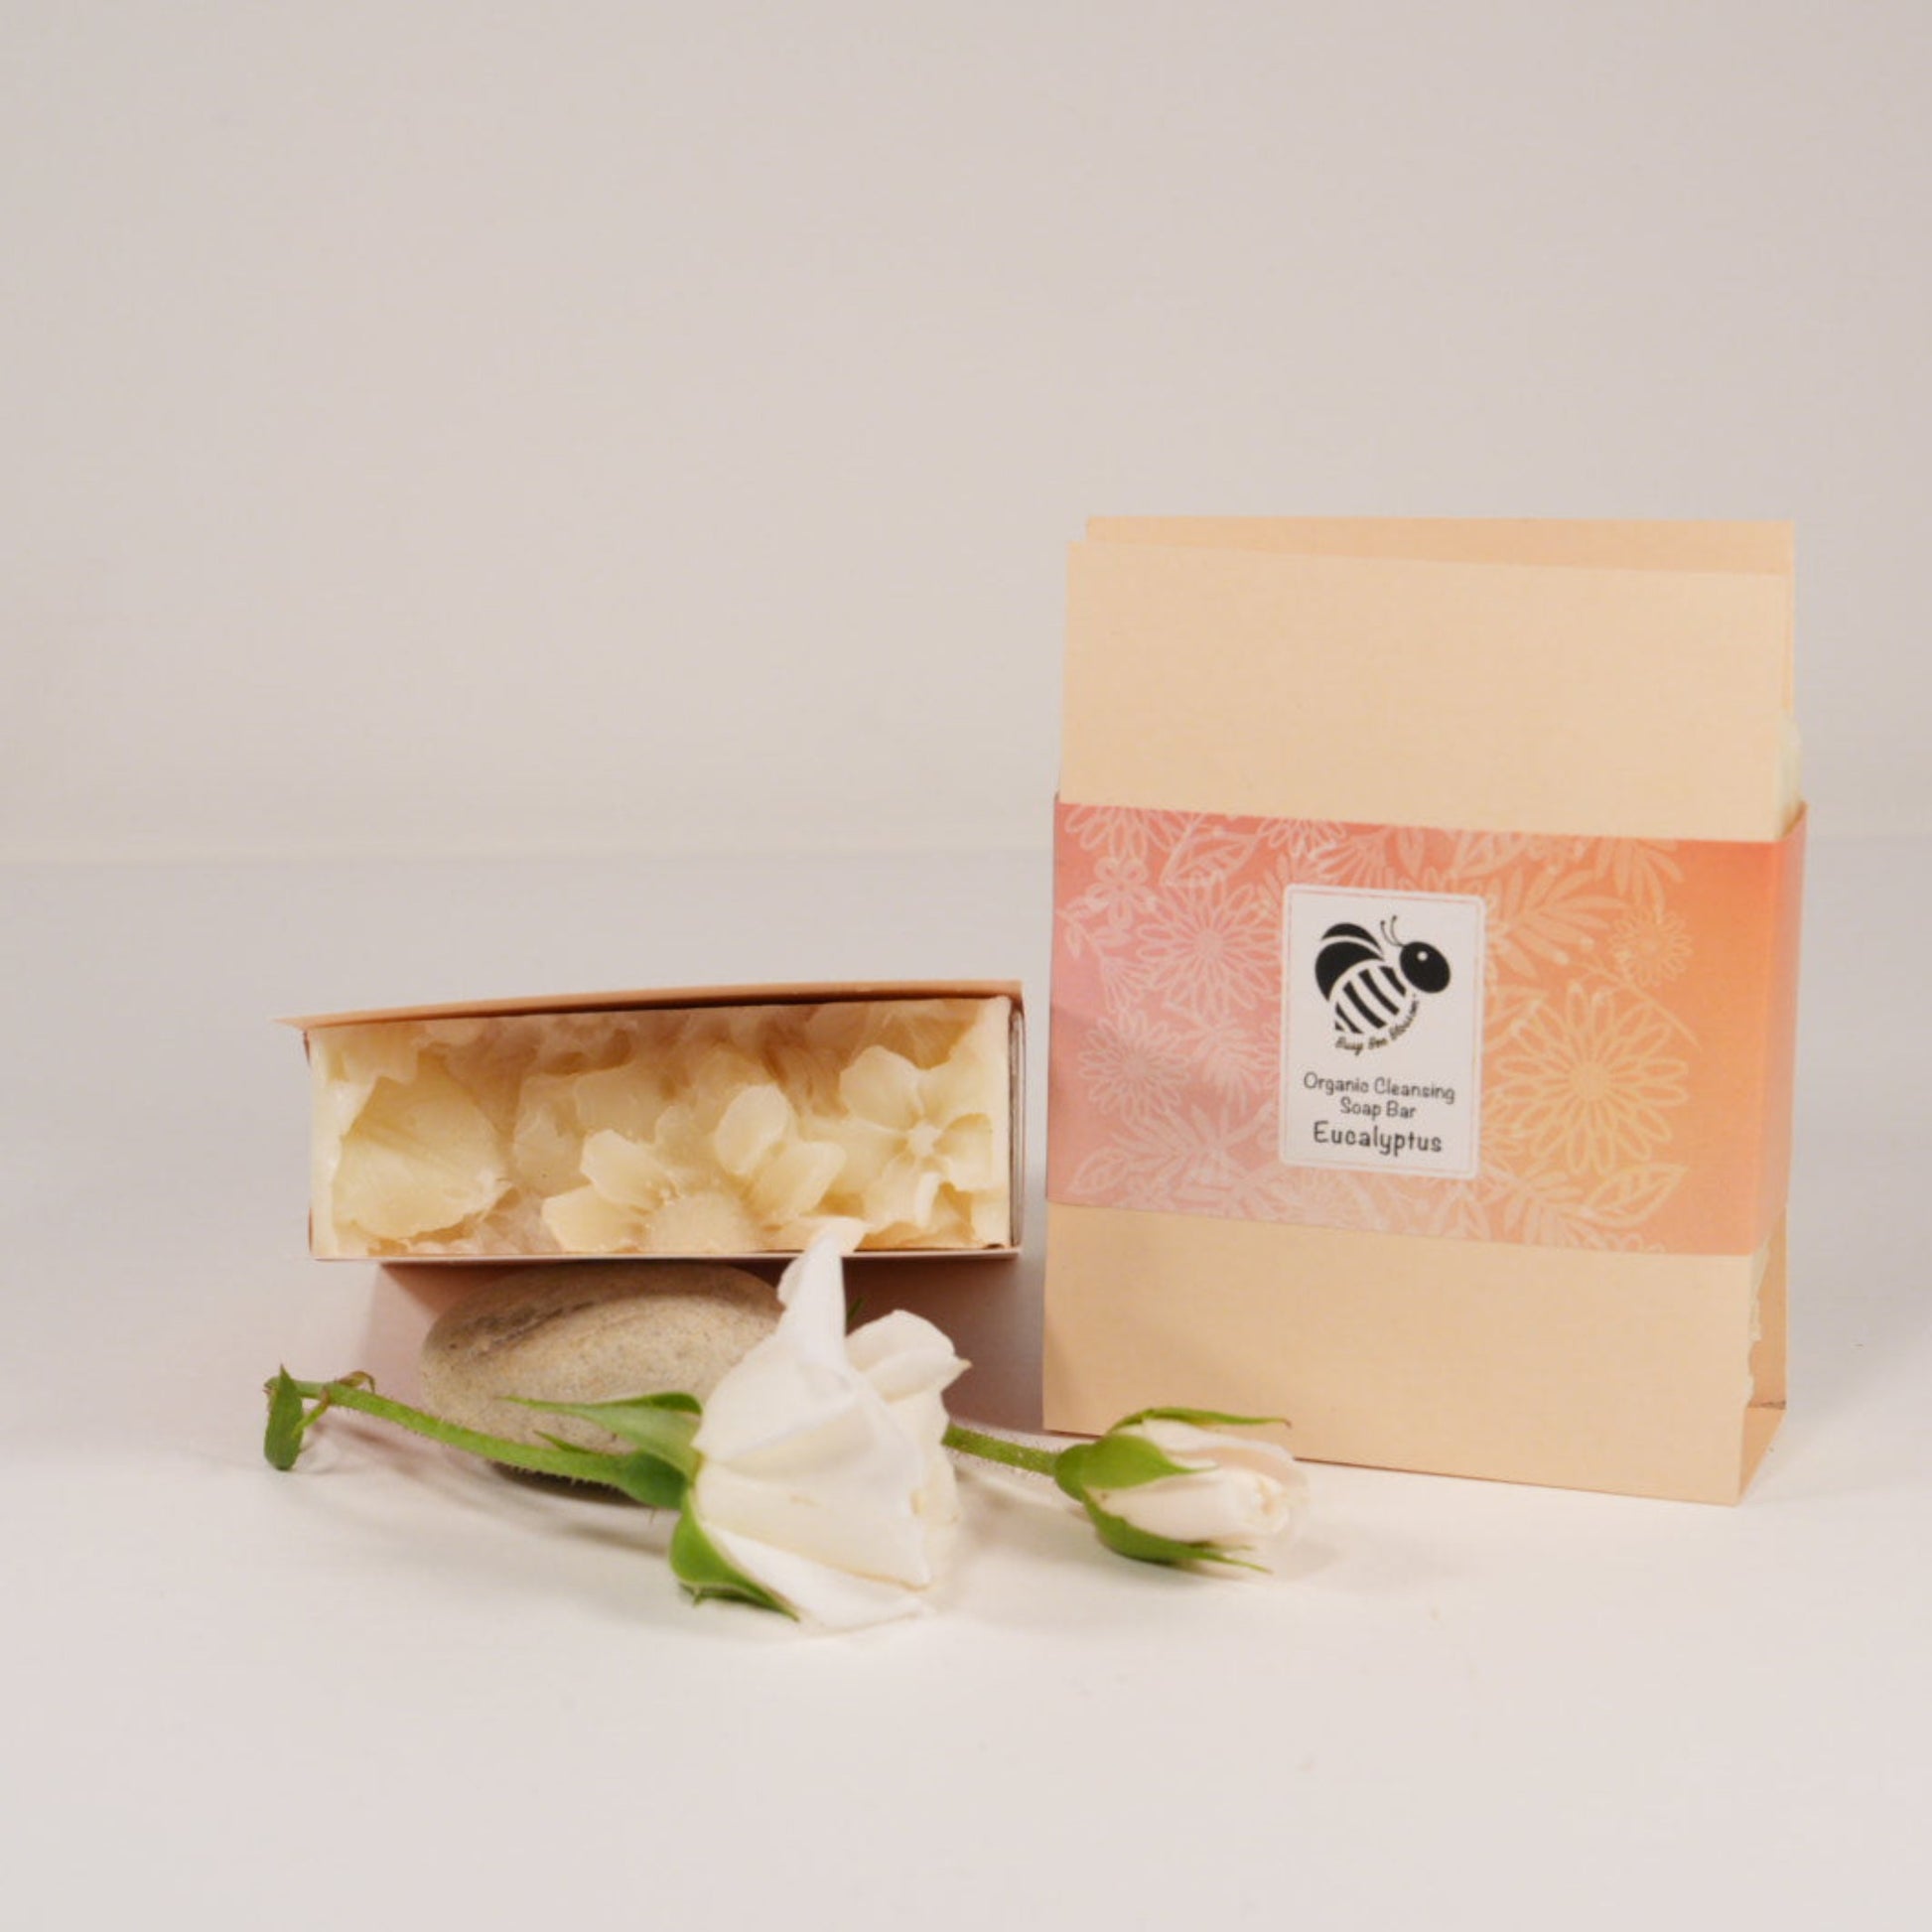 Eucalyptus Cleansing Soap Bars in labelled sleeve allows viewing of product while allowing them to air.